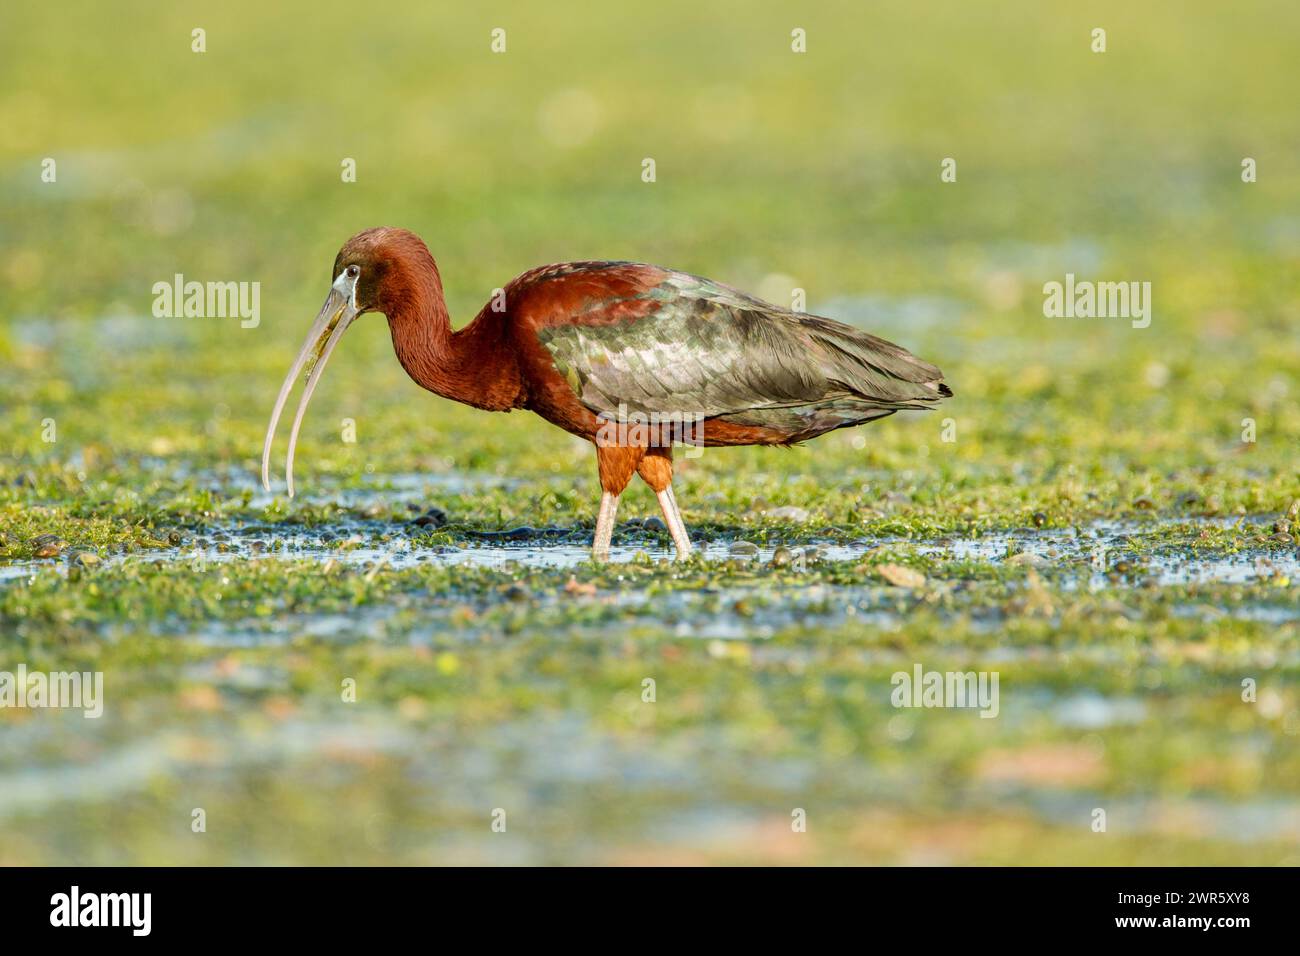 Glossy ibis (Plegadis falcinellus) foraging while standing in water and vegetation in the Danube Delta complex of lagoons Stock Photo